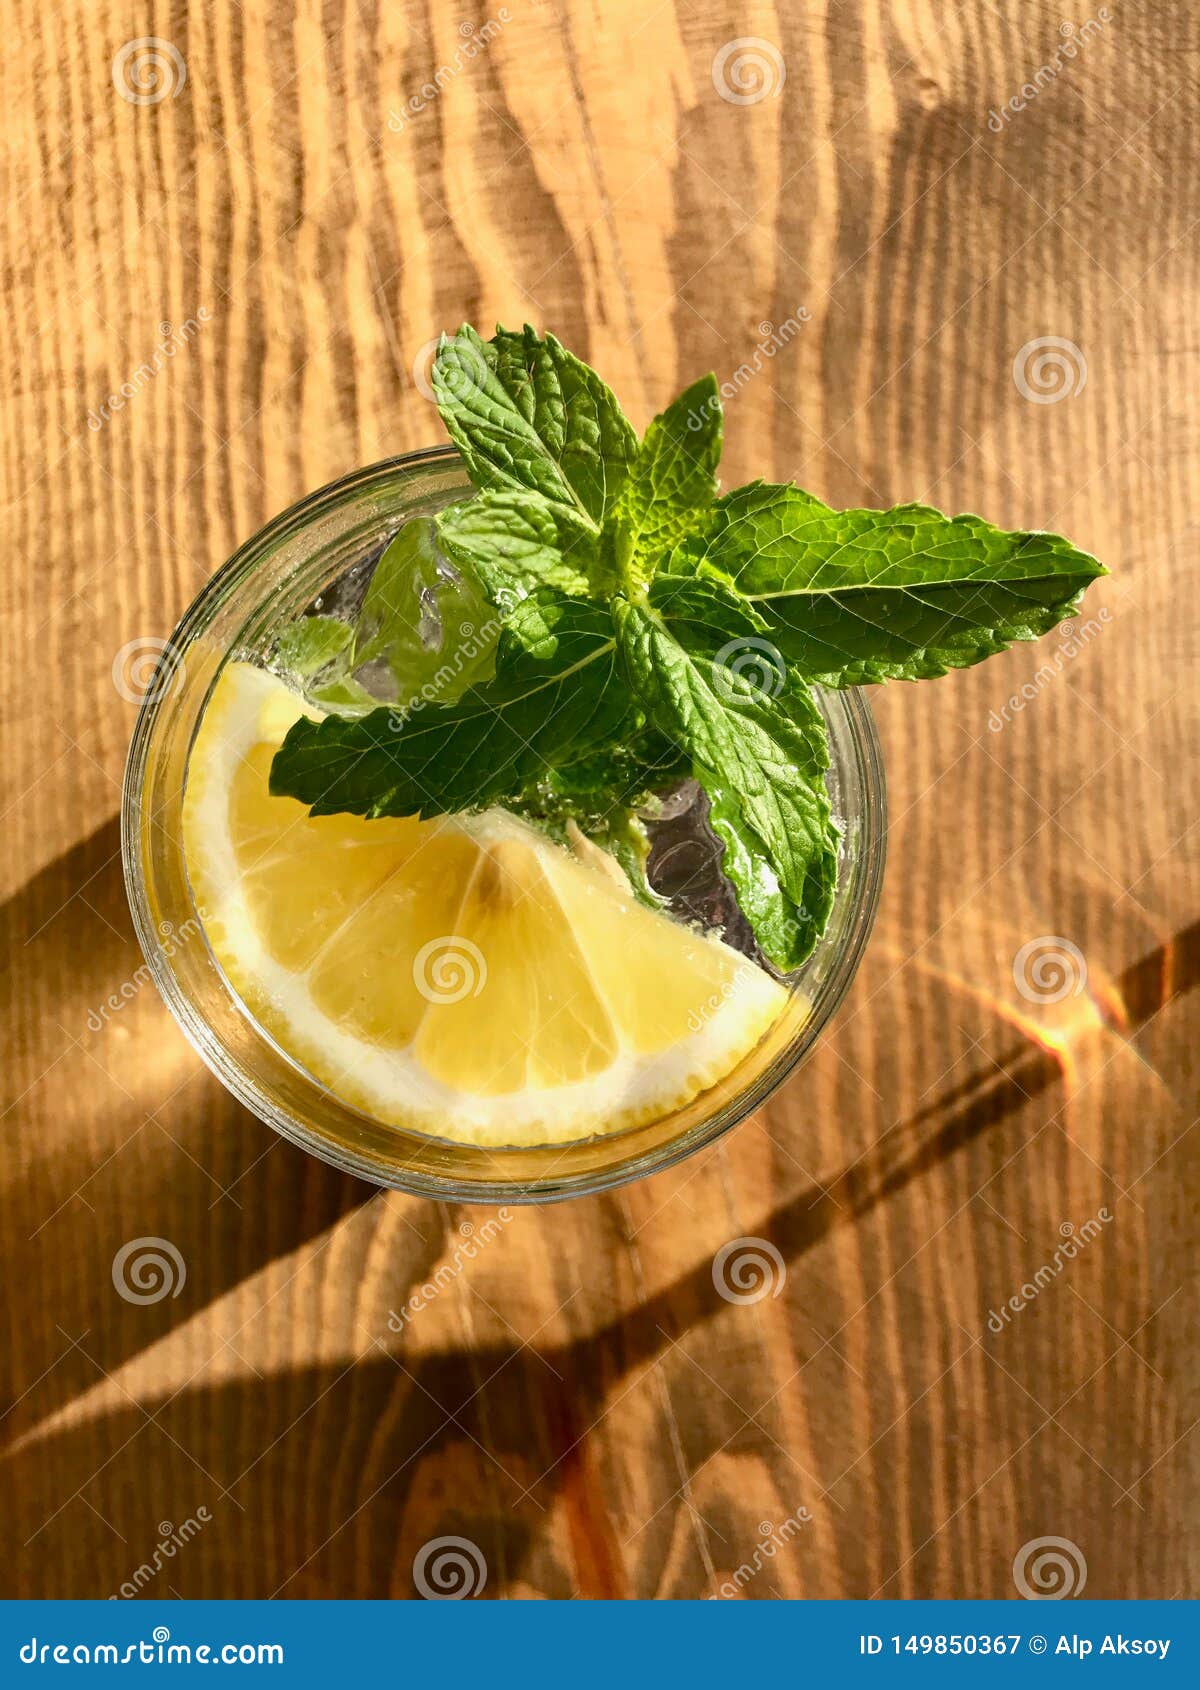 Summer Cocktail Gin Tonic with Fresh Mint Leaves on Wooden Surface Sea ...